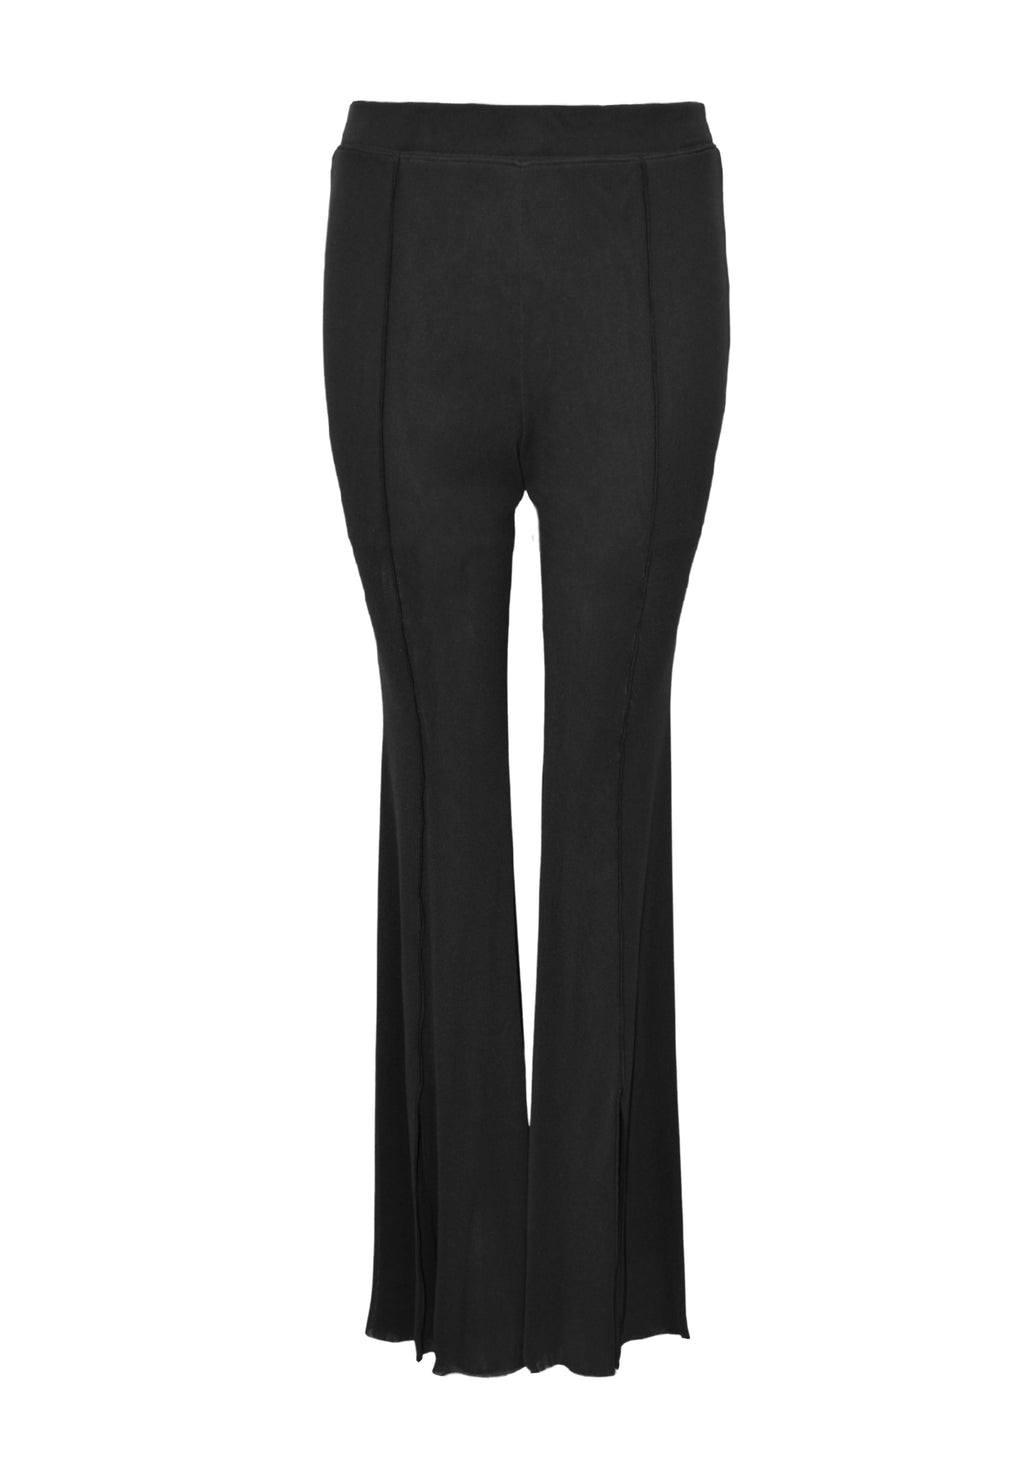 SOLID STRETCH NETTING PANTS – Vivienne Tam Store